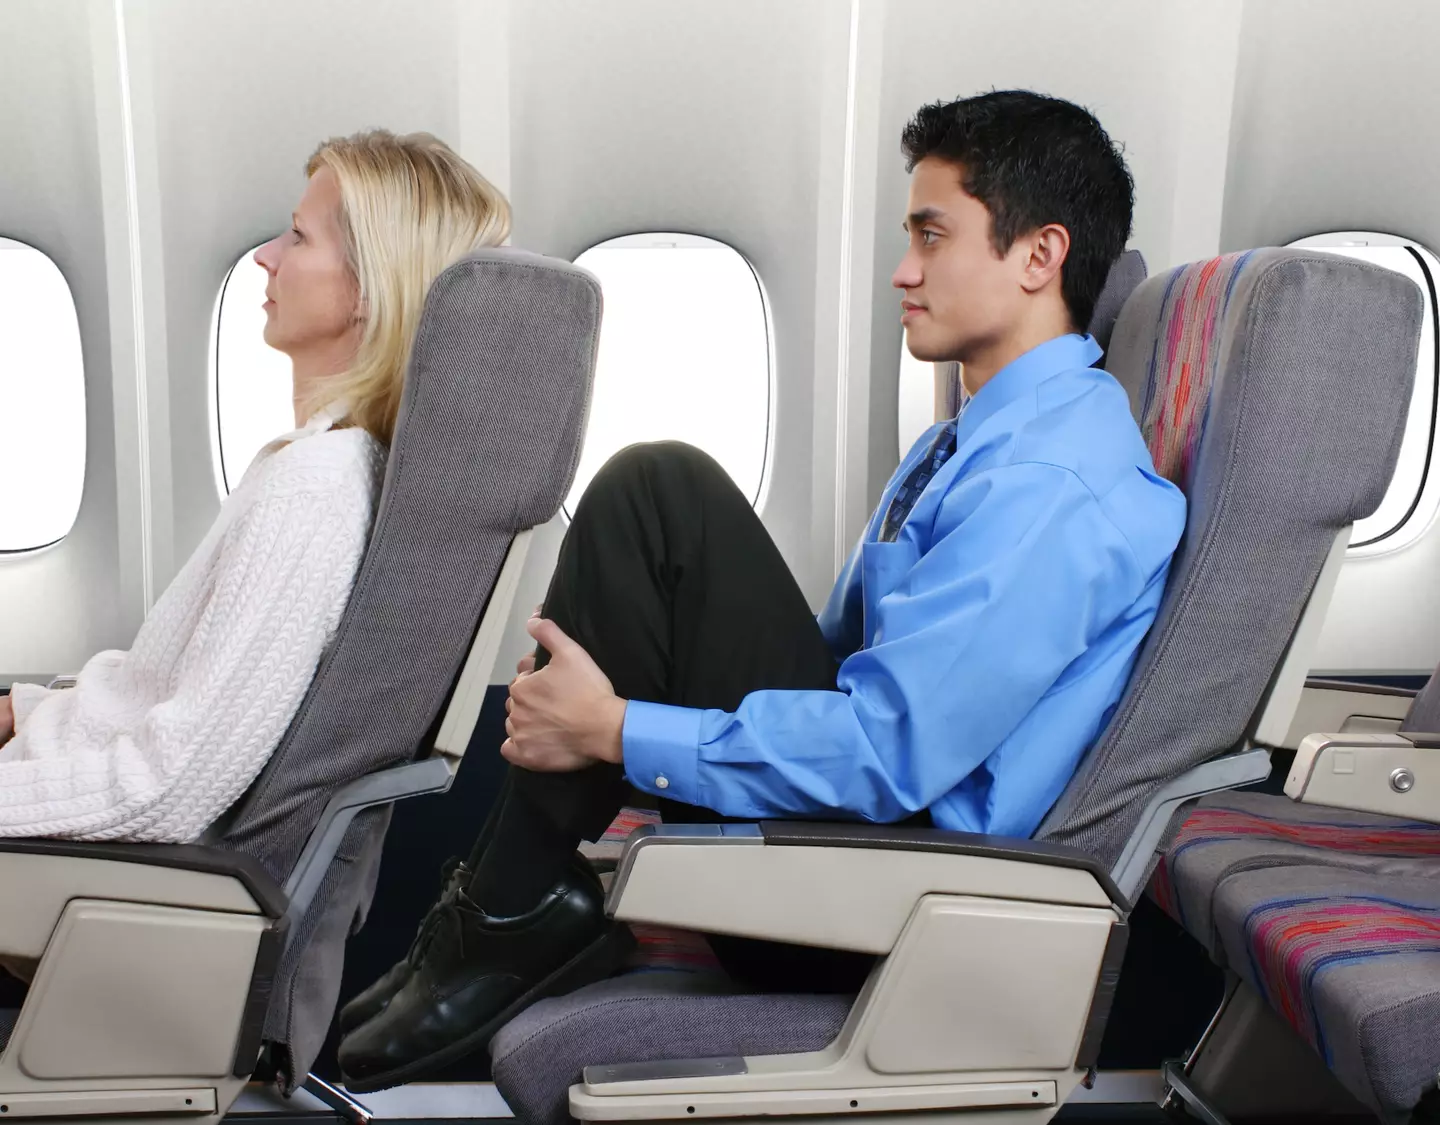 Some social media users sided with the TikToker and others were shocked at her move to recline her seat.